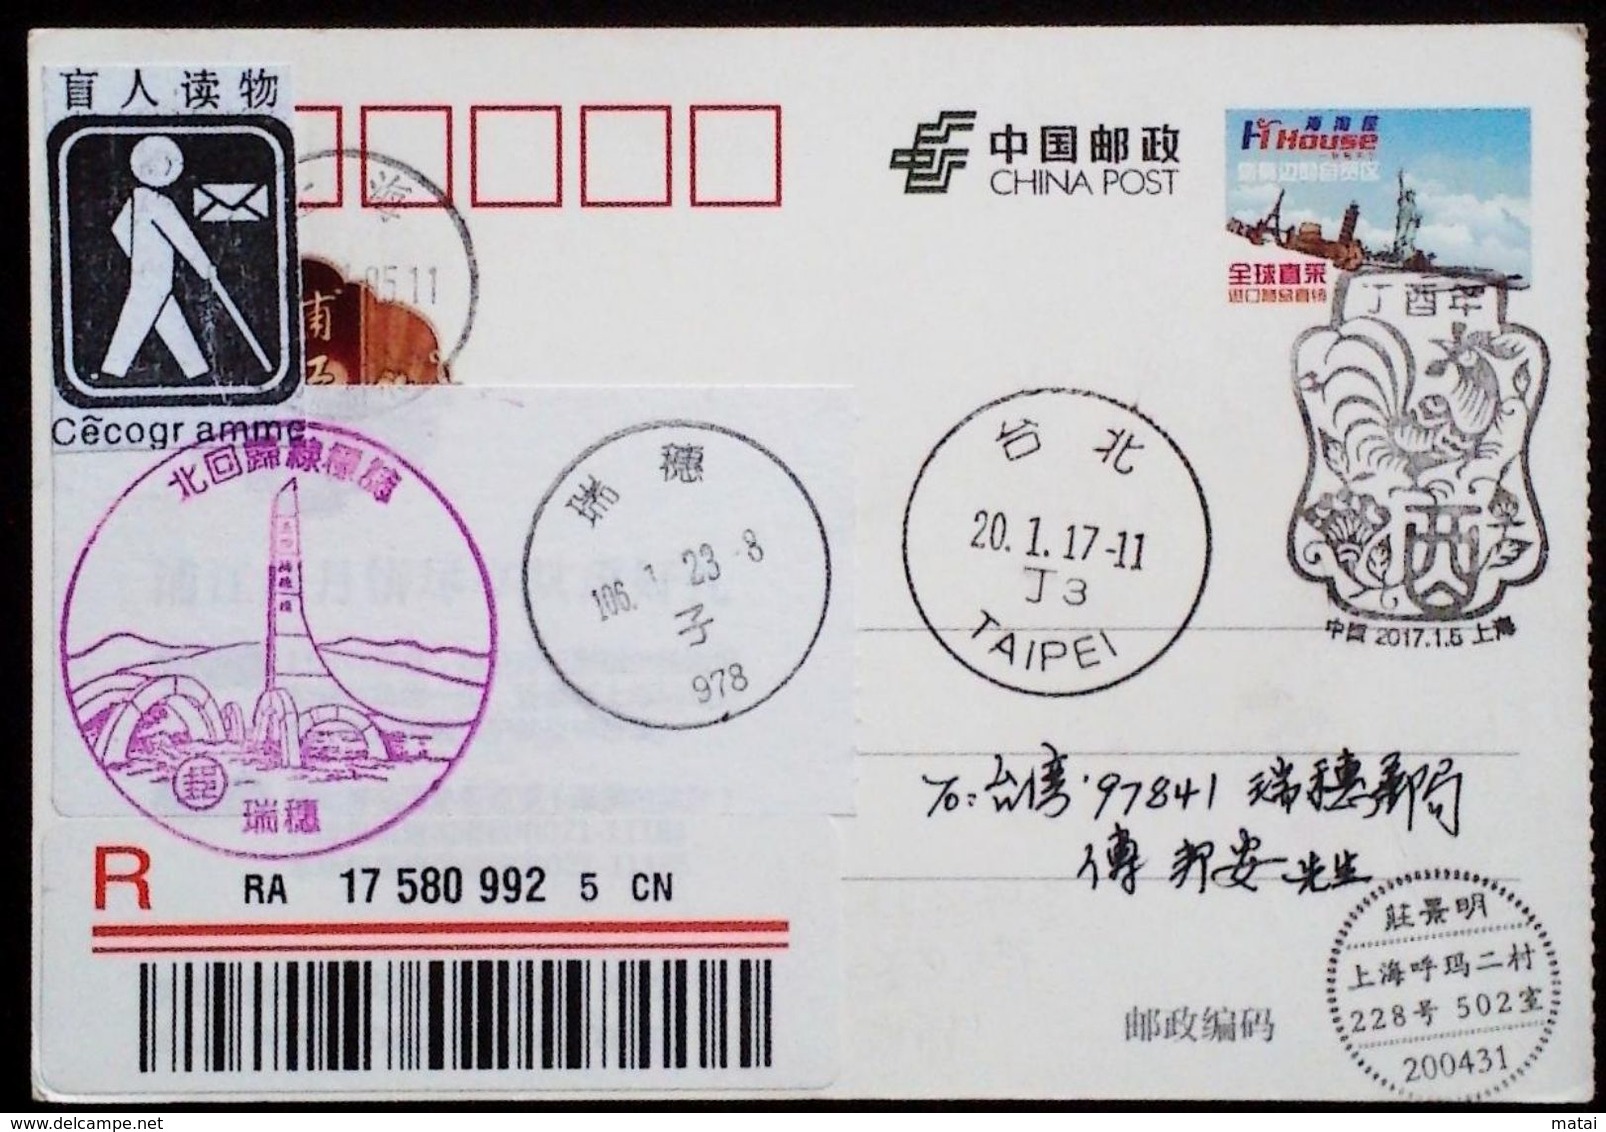 CHINA SHANGHAI TO TAIWAN LITERATURE FOR THE BLIND POSTCARD WITH CECOGR AMME LABEL & SHANGHAI & TAIWAN SCENIC POSTMARK 17 - Taiwan